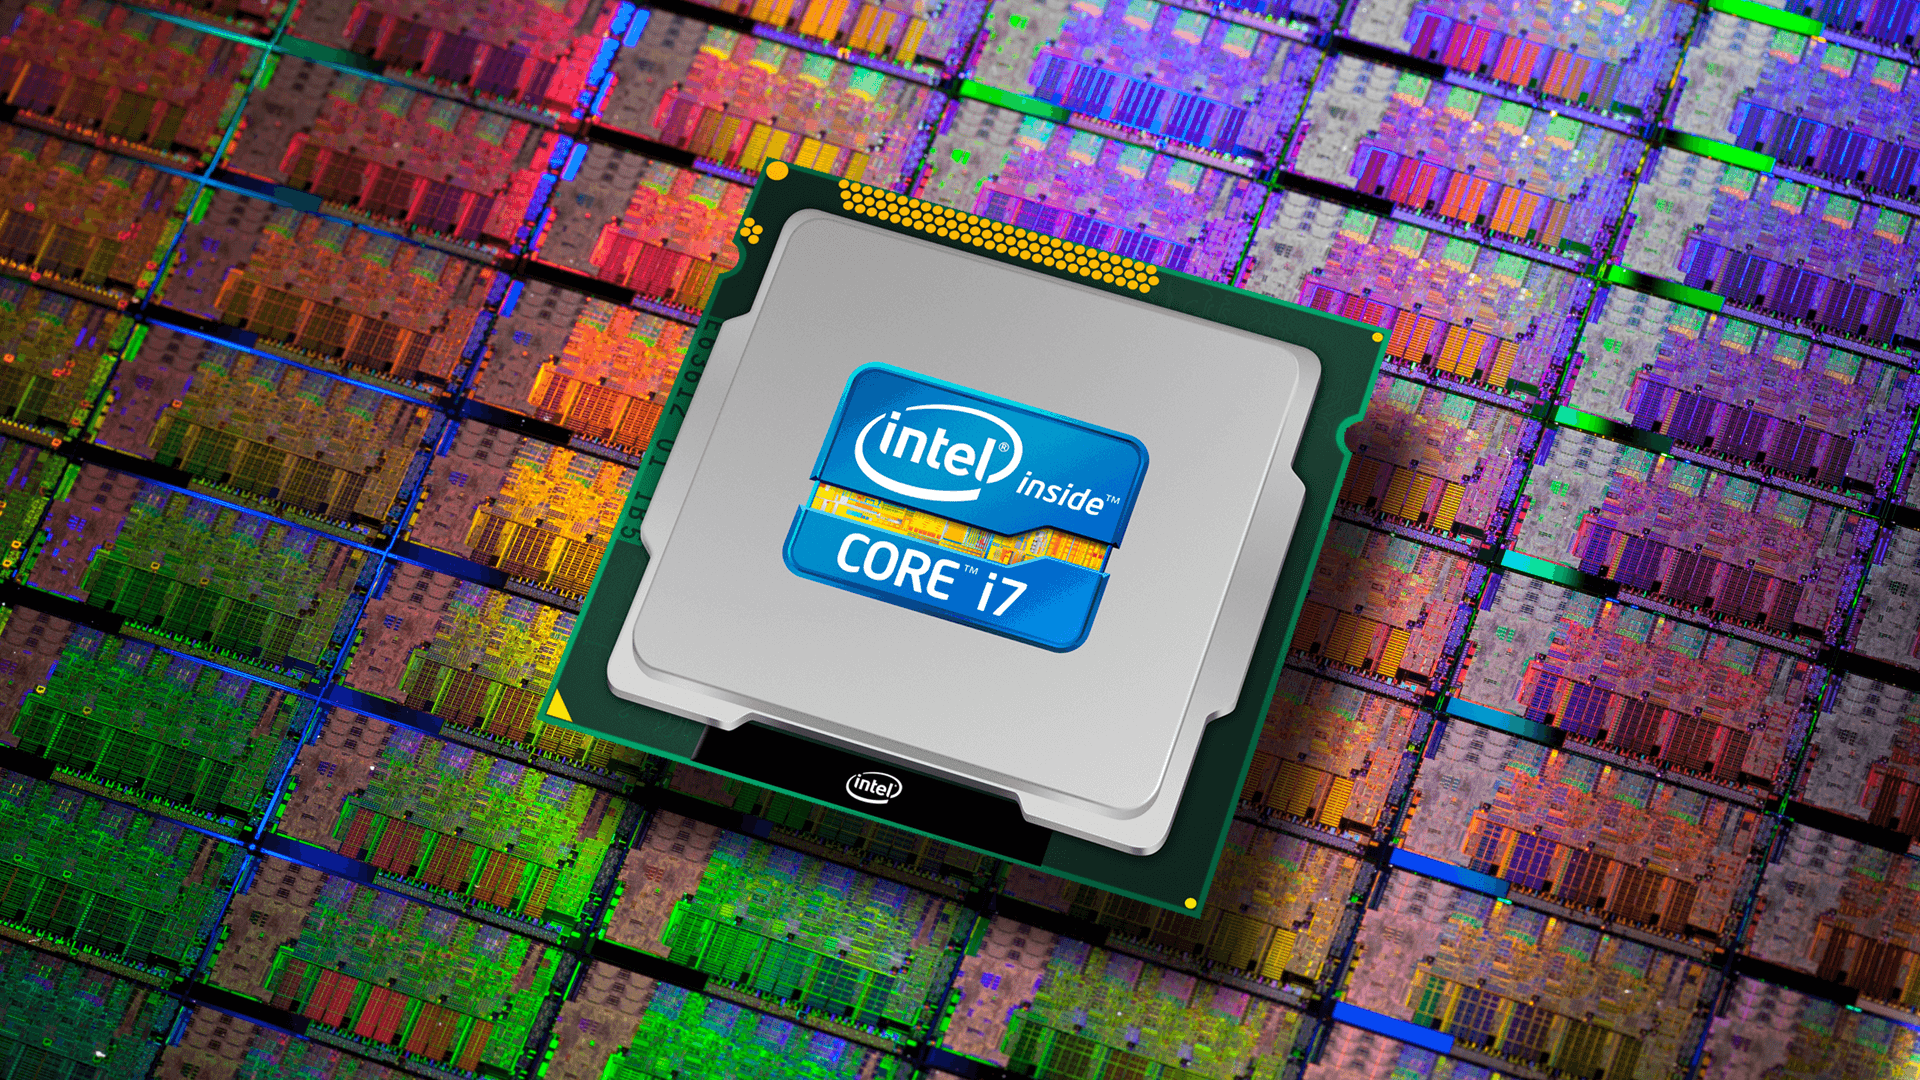 10 Intel HD Wallpapers and Backgrounds